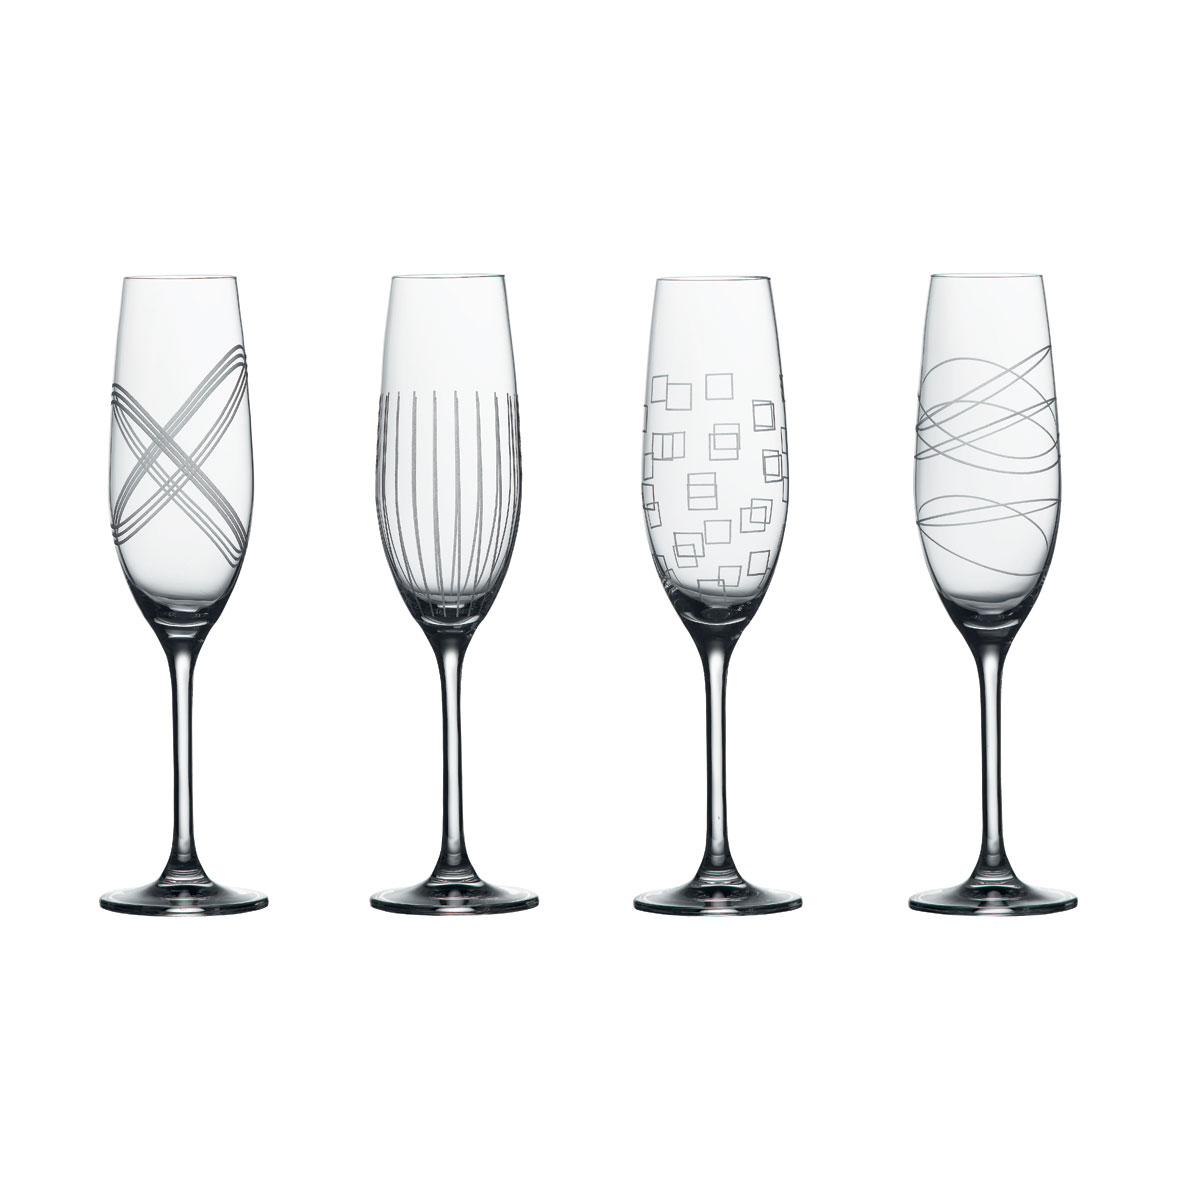 Royal Doulton, Party Crystal Flute, Set of 4